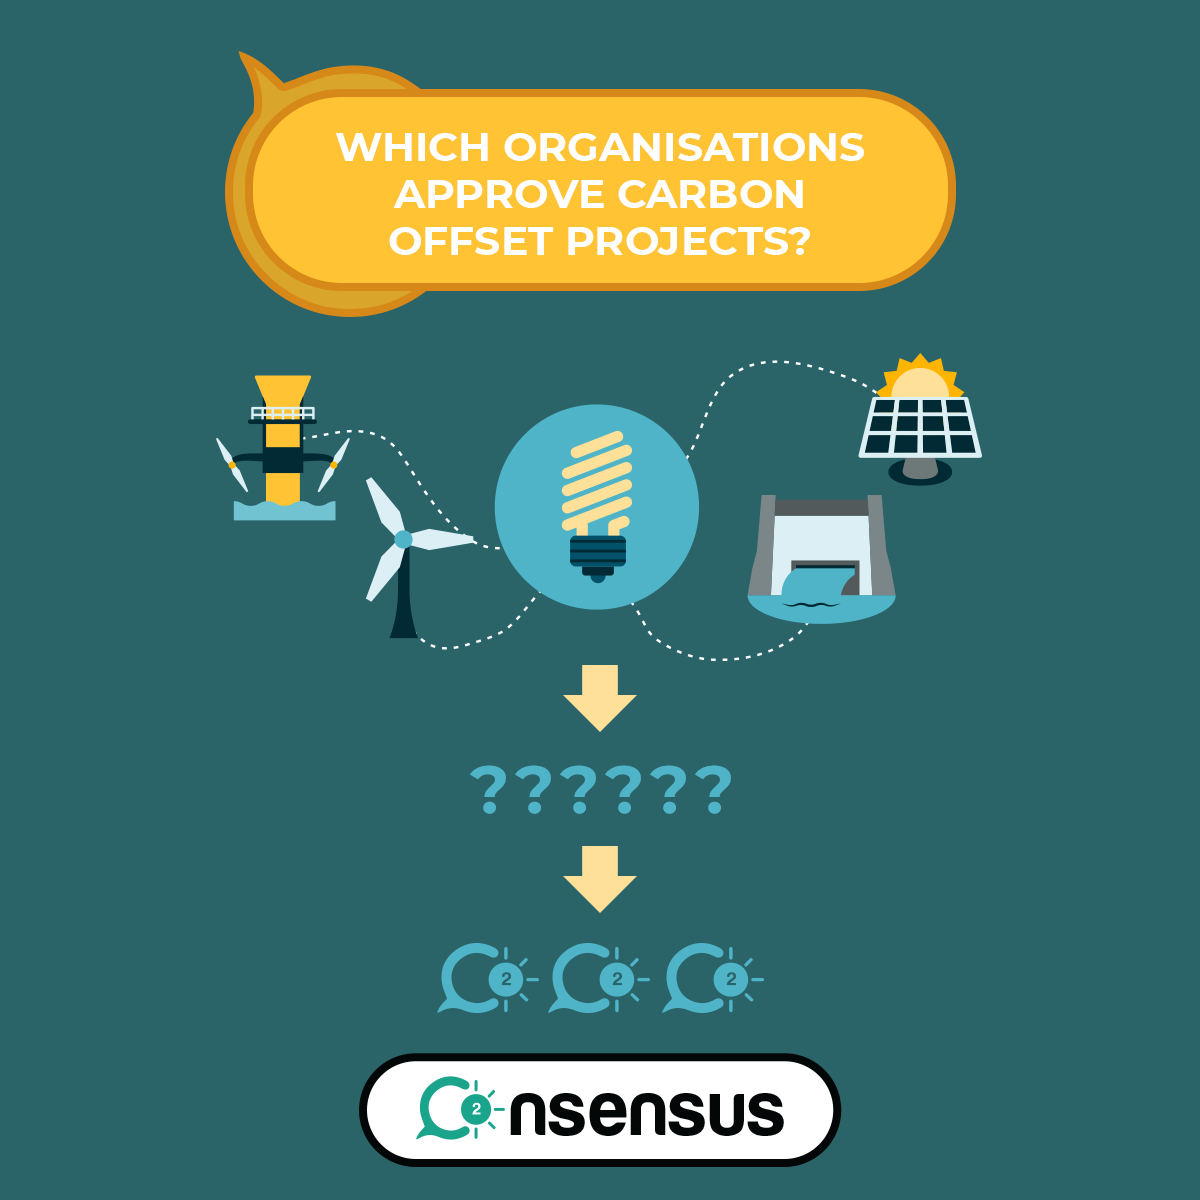 Which organizations approve carbon offset projects